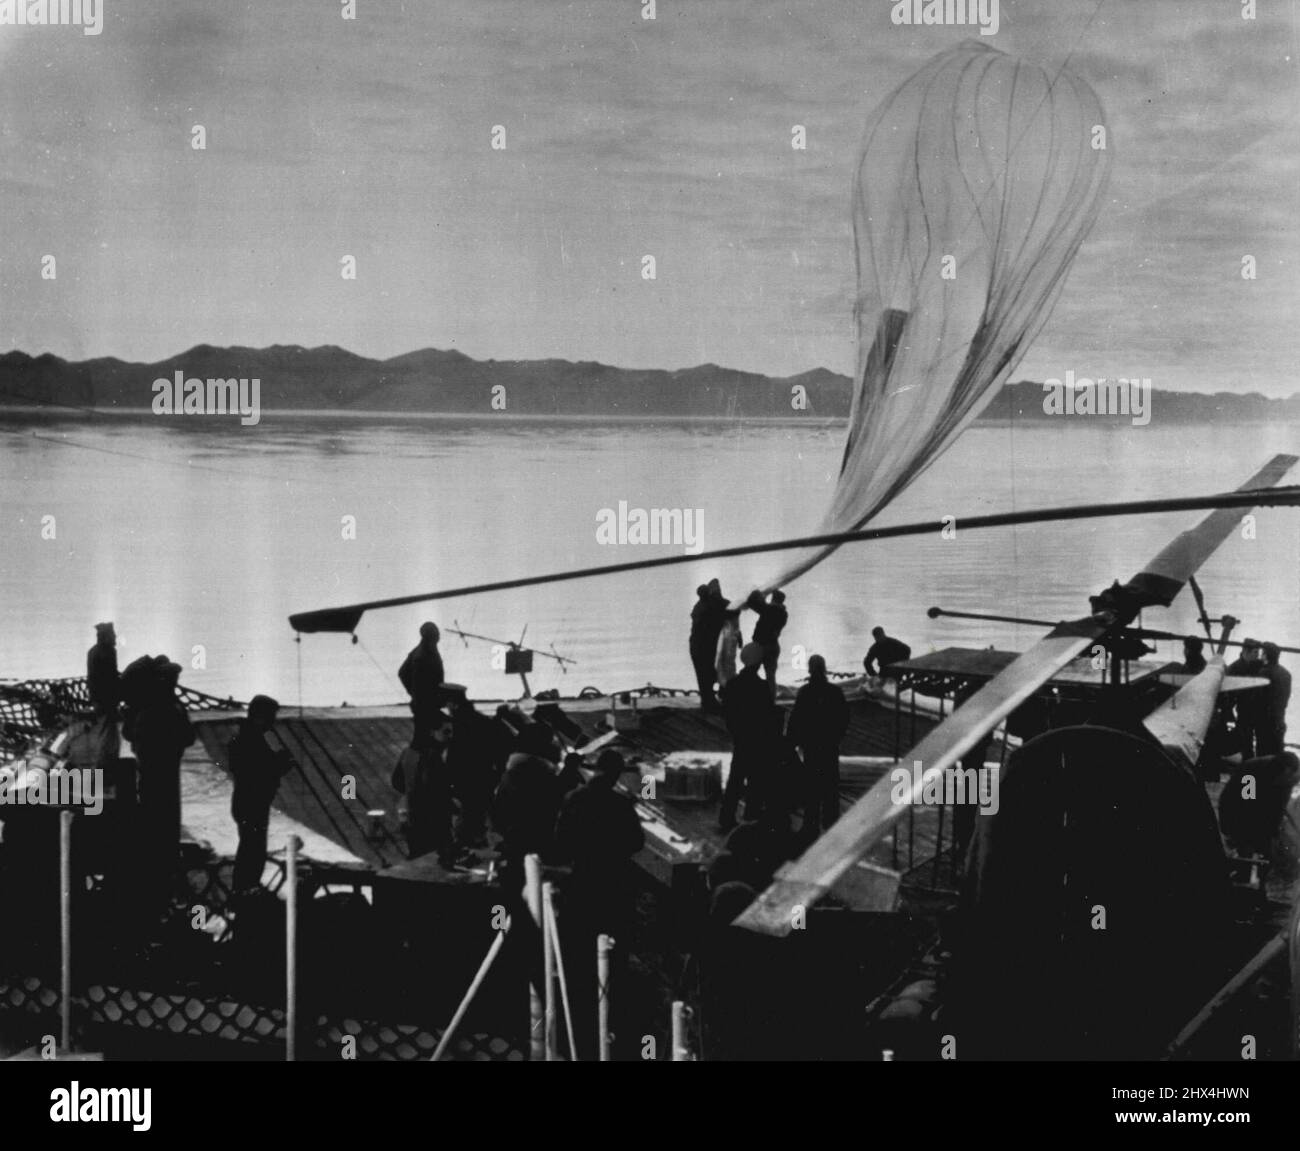 Seek Cosmic Ray Data In Far North -- Crewmen of the Coast Guard Cutter Eastwind launch a plastic balloon from the ship's flight deck during a series of high altitude cosmic ray studies. The tests were conducted by Naval and civilian scientists in August and September off the Greenland coast in the vicinity of the magnetic pole. October 15, 1952. (Photo by AP Wirephoto). Stock Photo